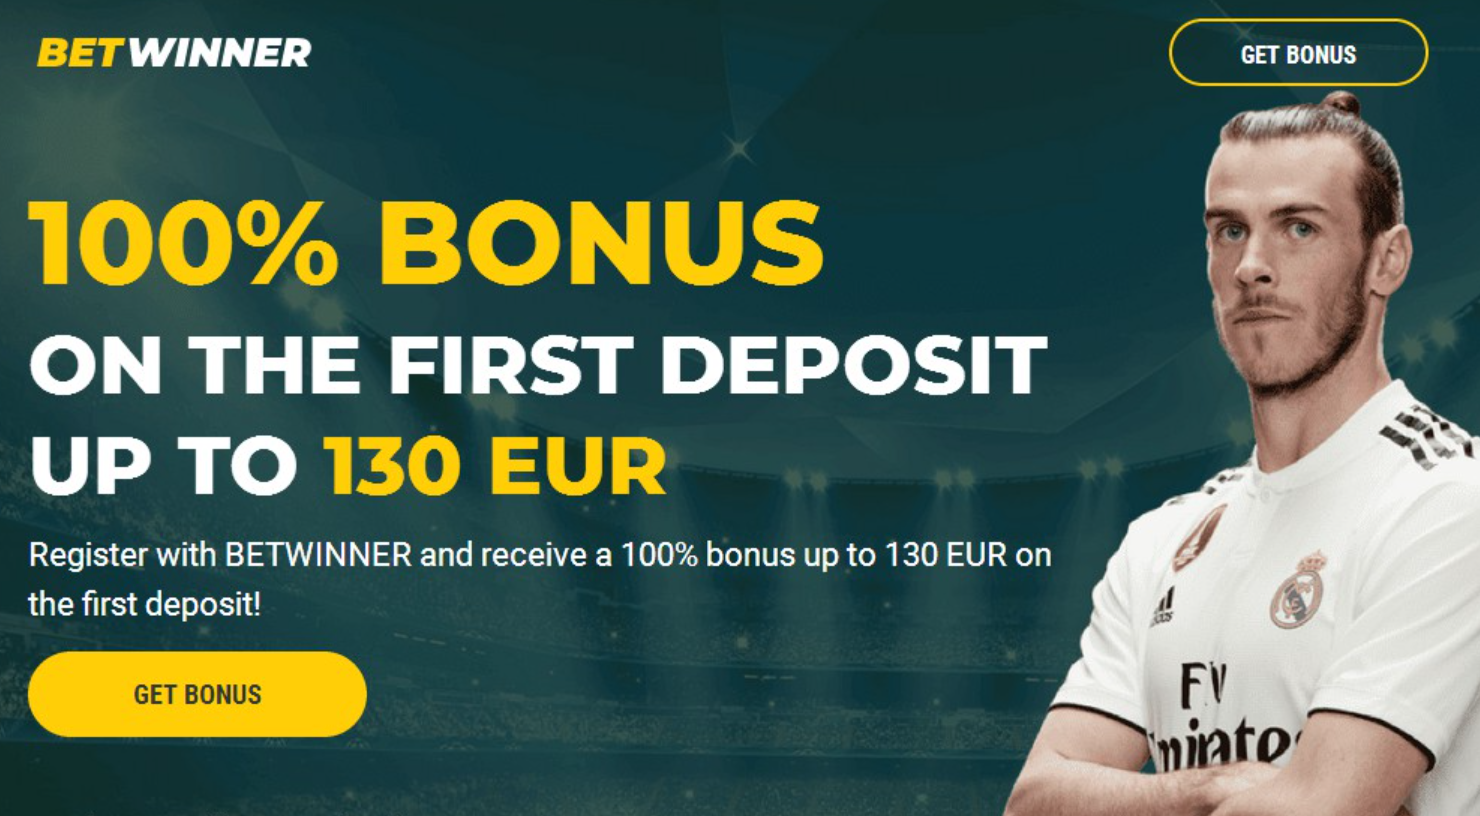 Betwinner bonus terms and conditions for new clients